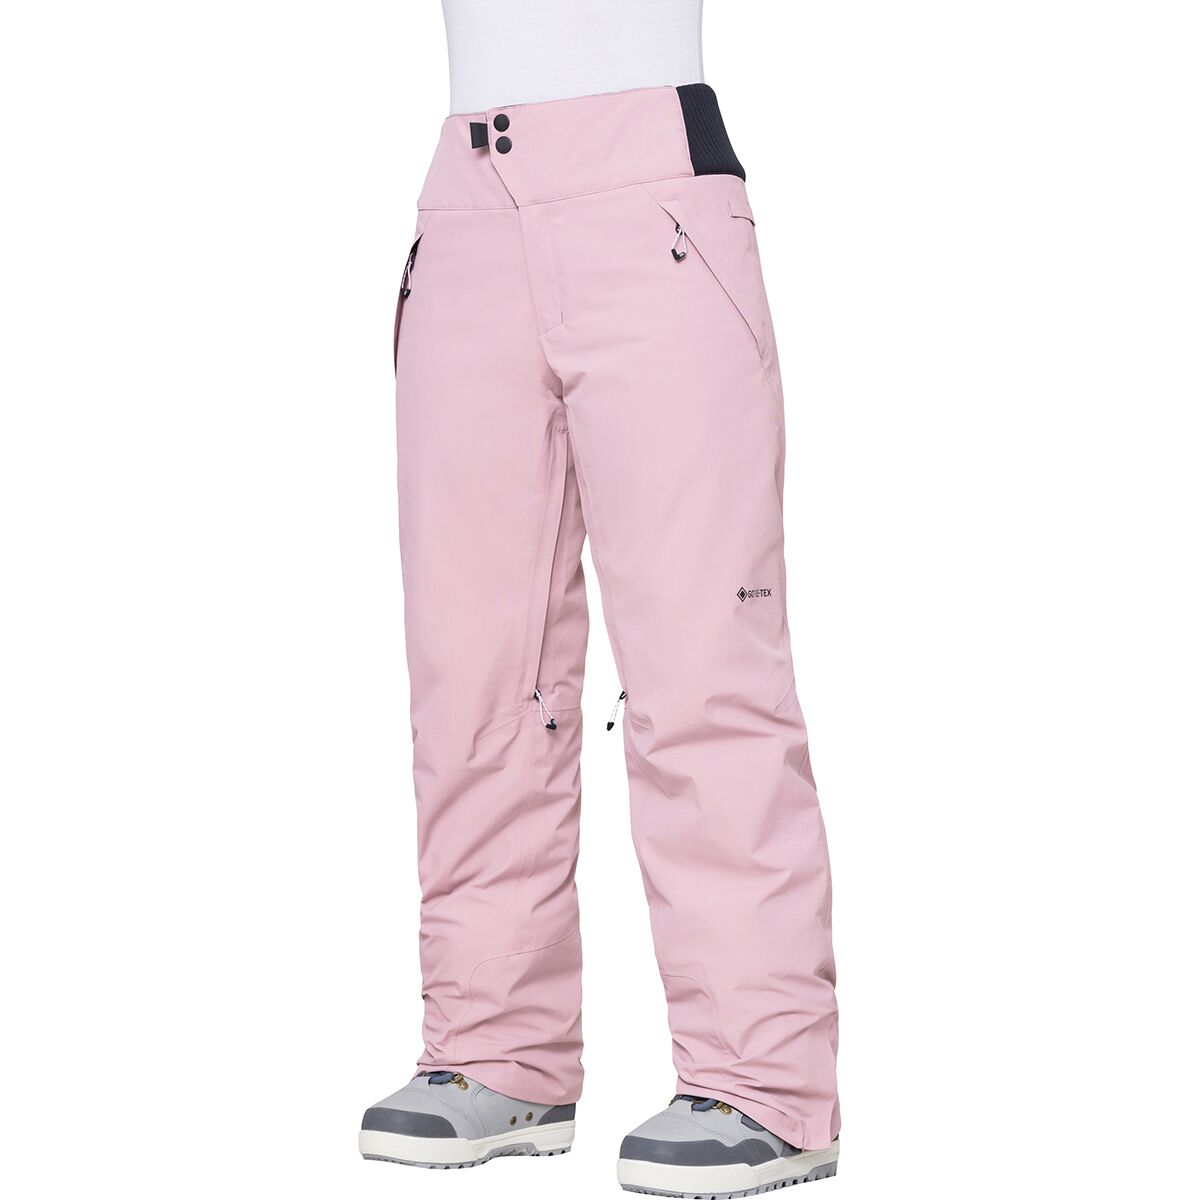 686 Willow GORE-TEX Insulated Pant - Women's